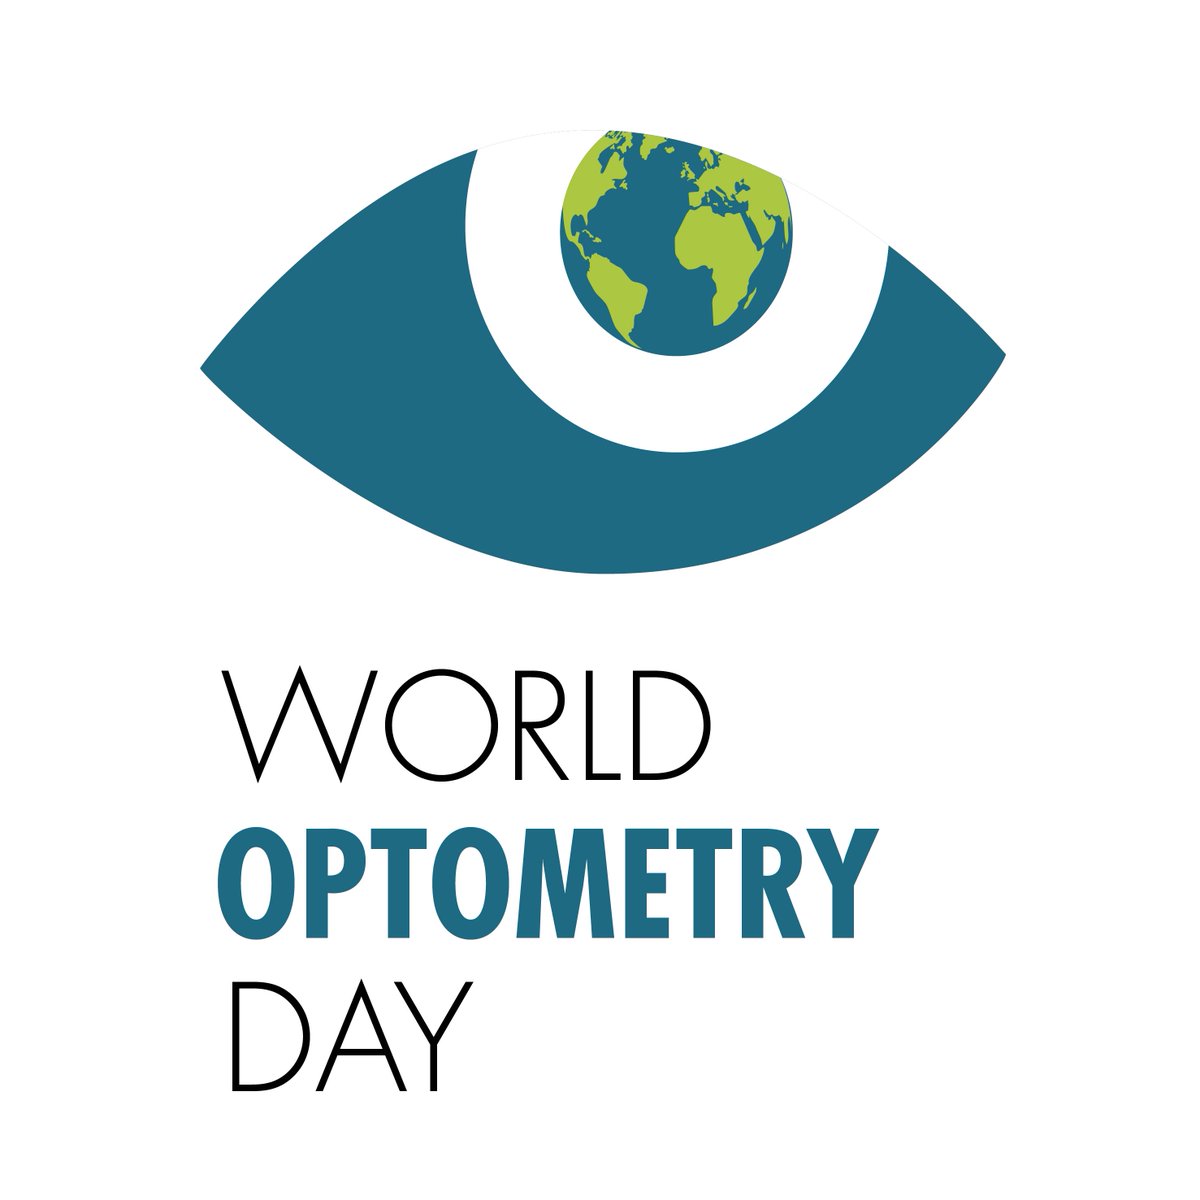 Happy World Optometry Day from your friends at OCuSOFT! 
#WorldOptometryDay #WorldOptometryDay2023 #OptometryDay #EyeCare #HealthyVision #Optometry #EyeHealth #OCuSOFT